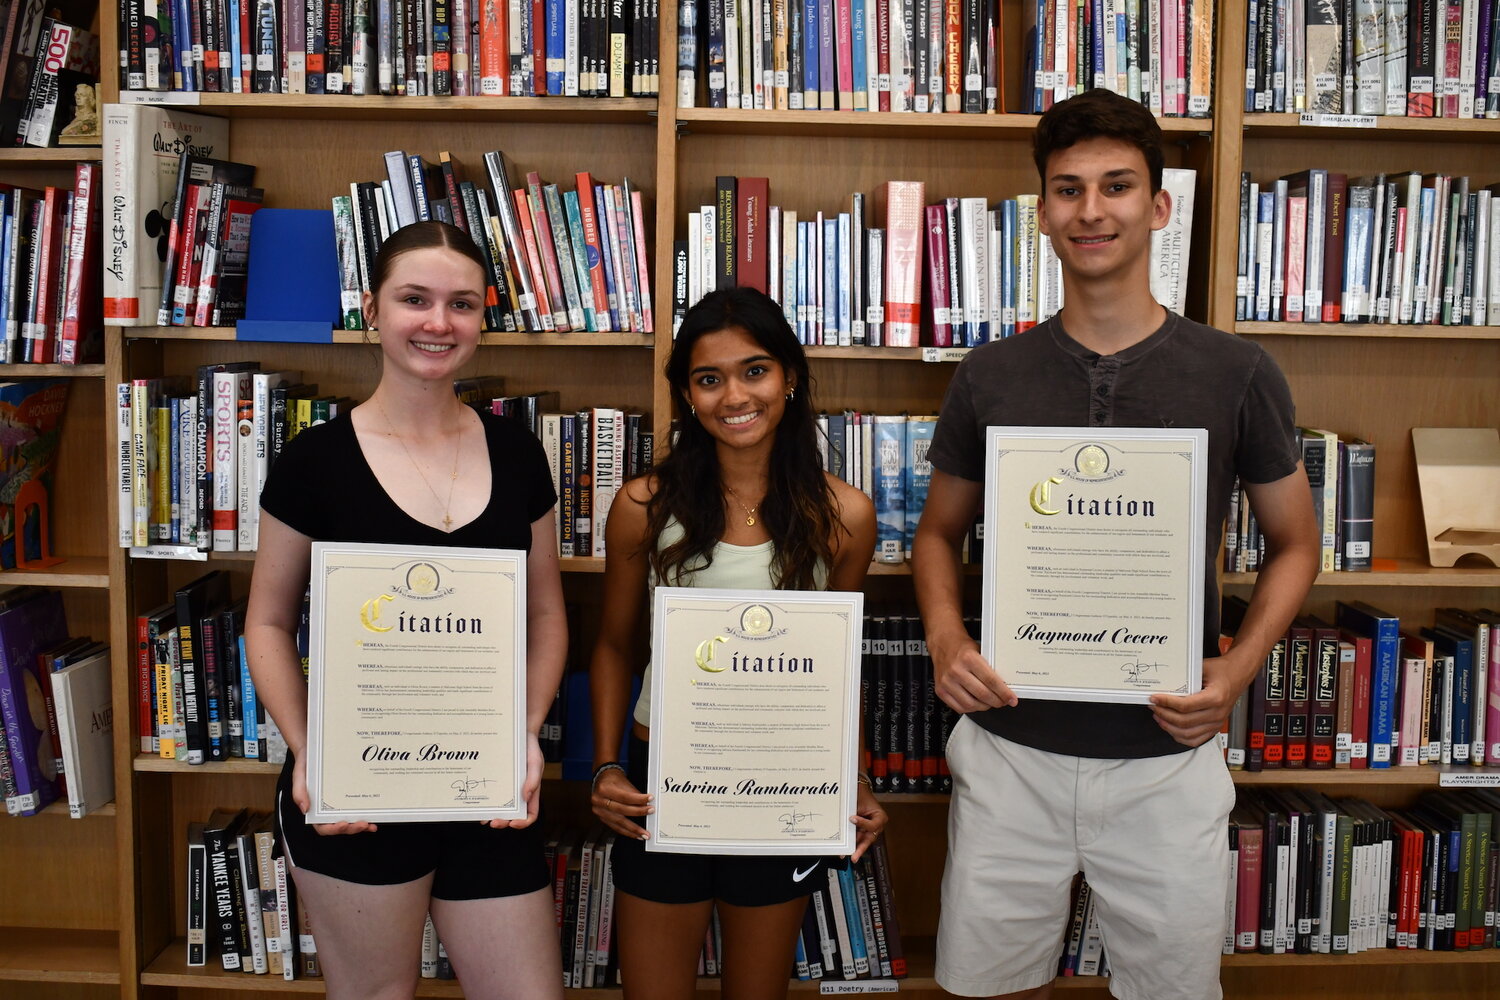 Malverne High School students Olivia Brown, Sabrina Ramharakh, and Raymond Cecere were recognized as Young Leaders in the 21st Century by Assemblyman Brian Curran.